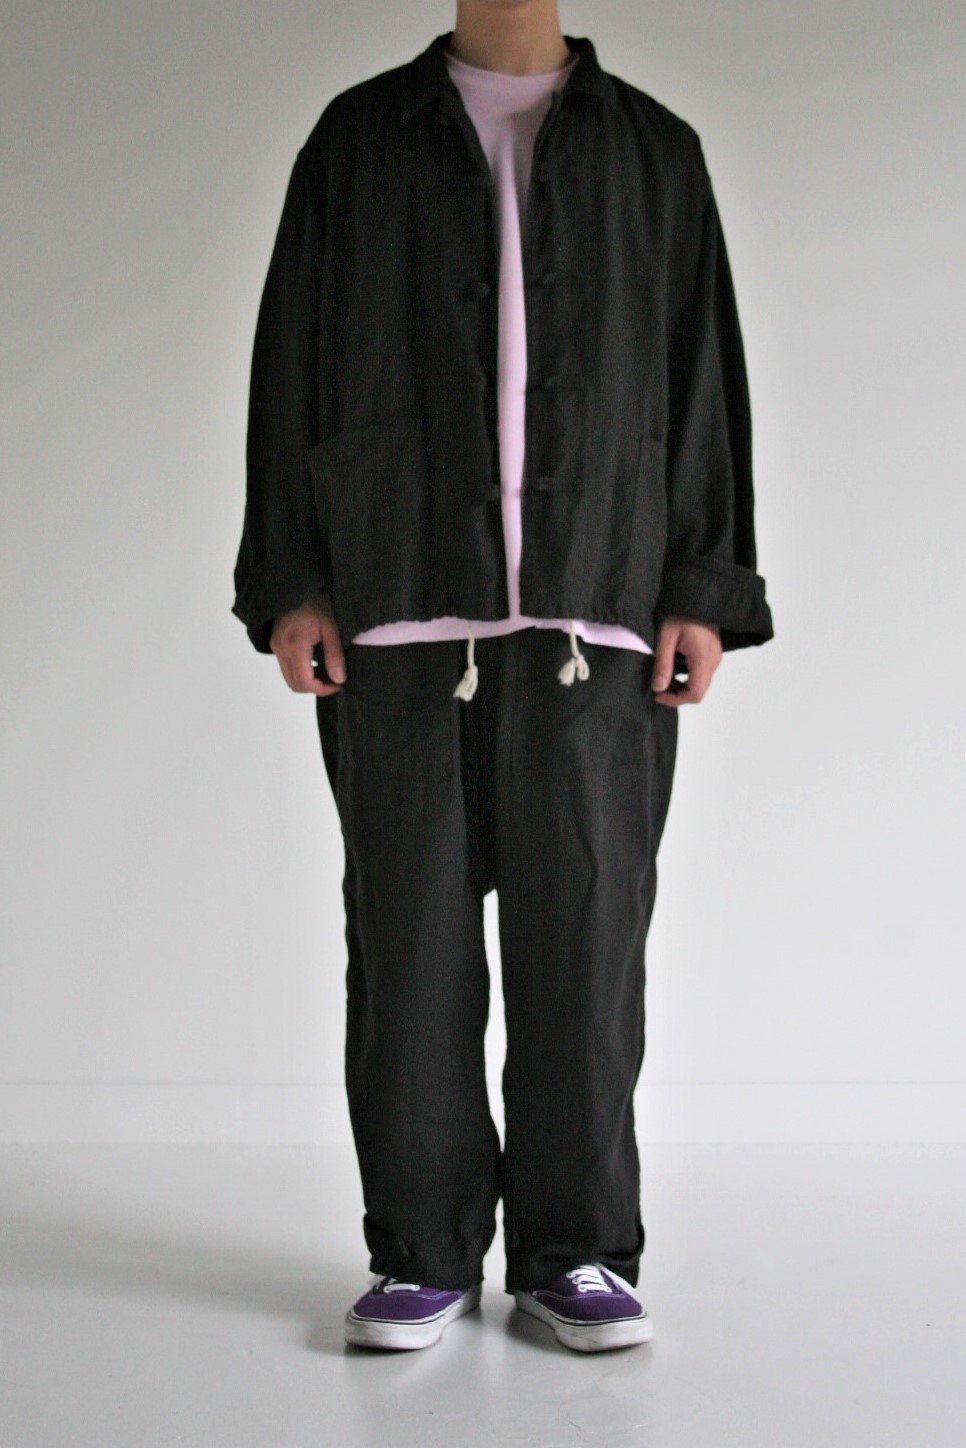 ANACHRONORM “ROLL UP SLEEVES CHINA COVERALL SHIRTS” - Tribeca